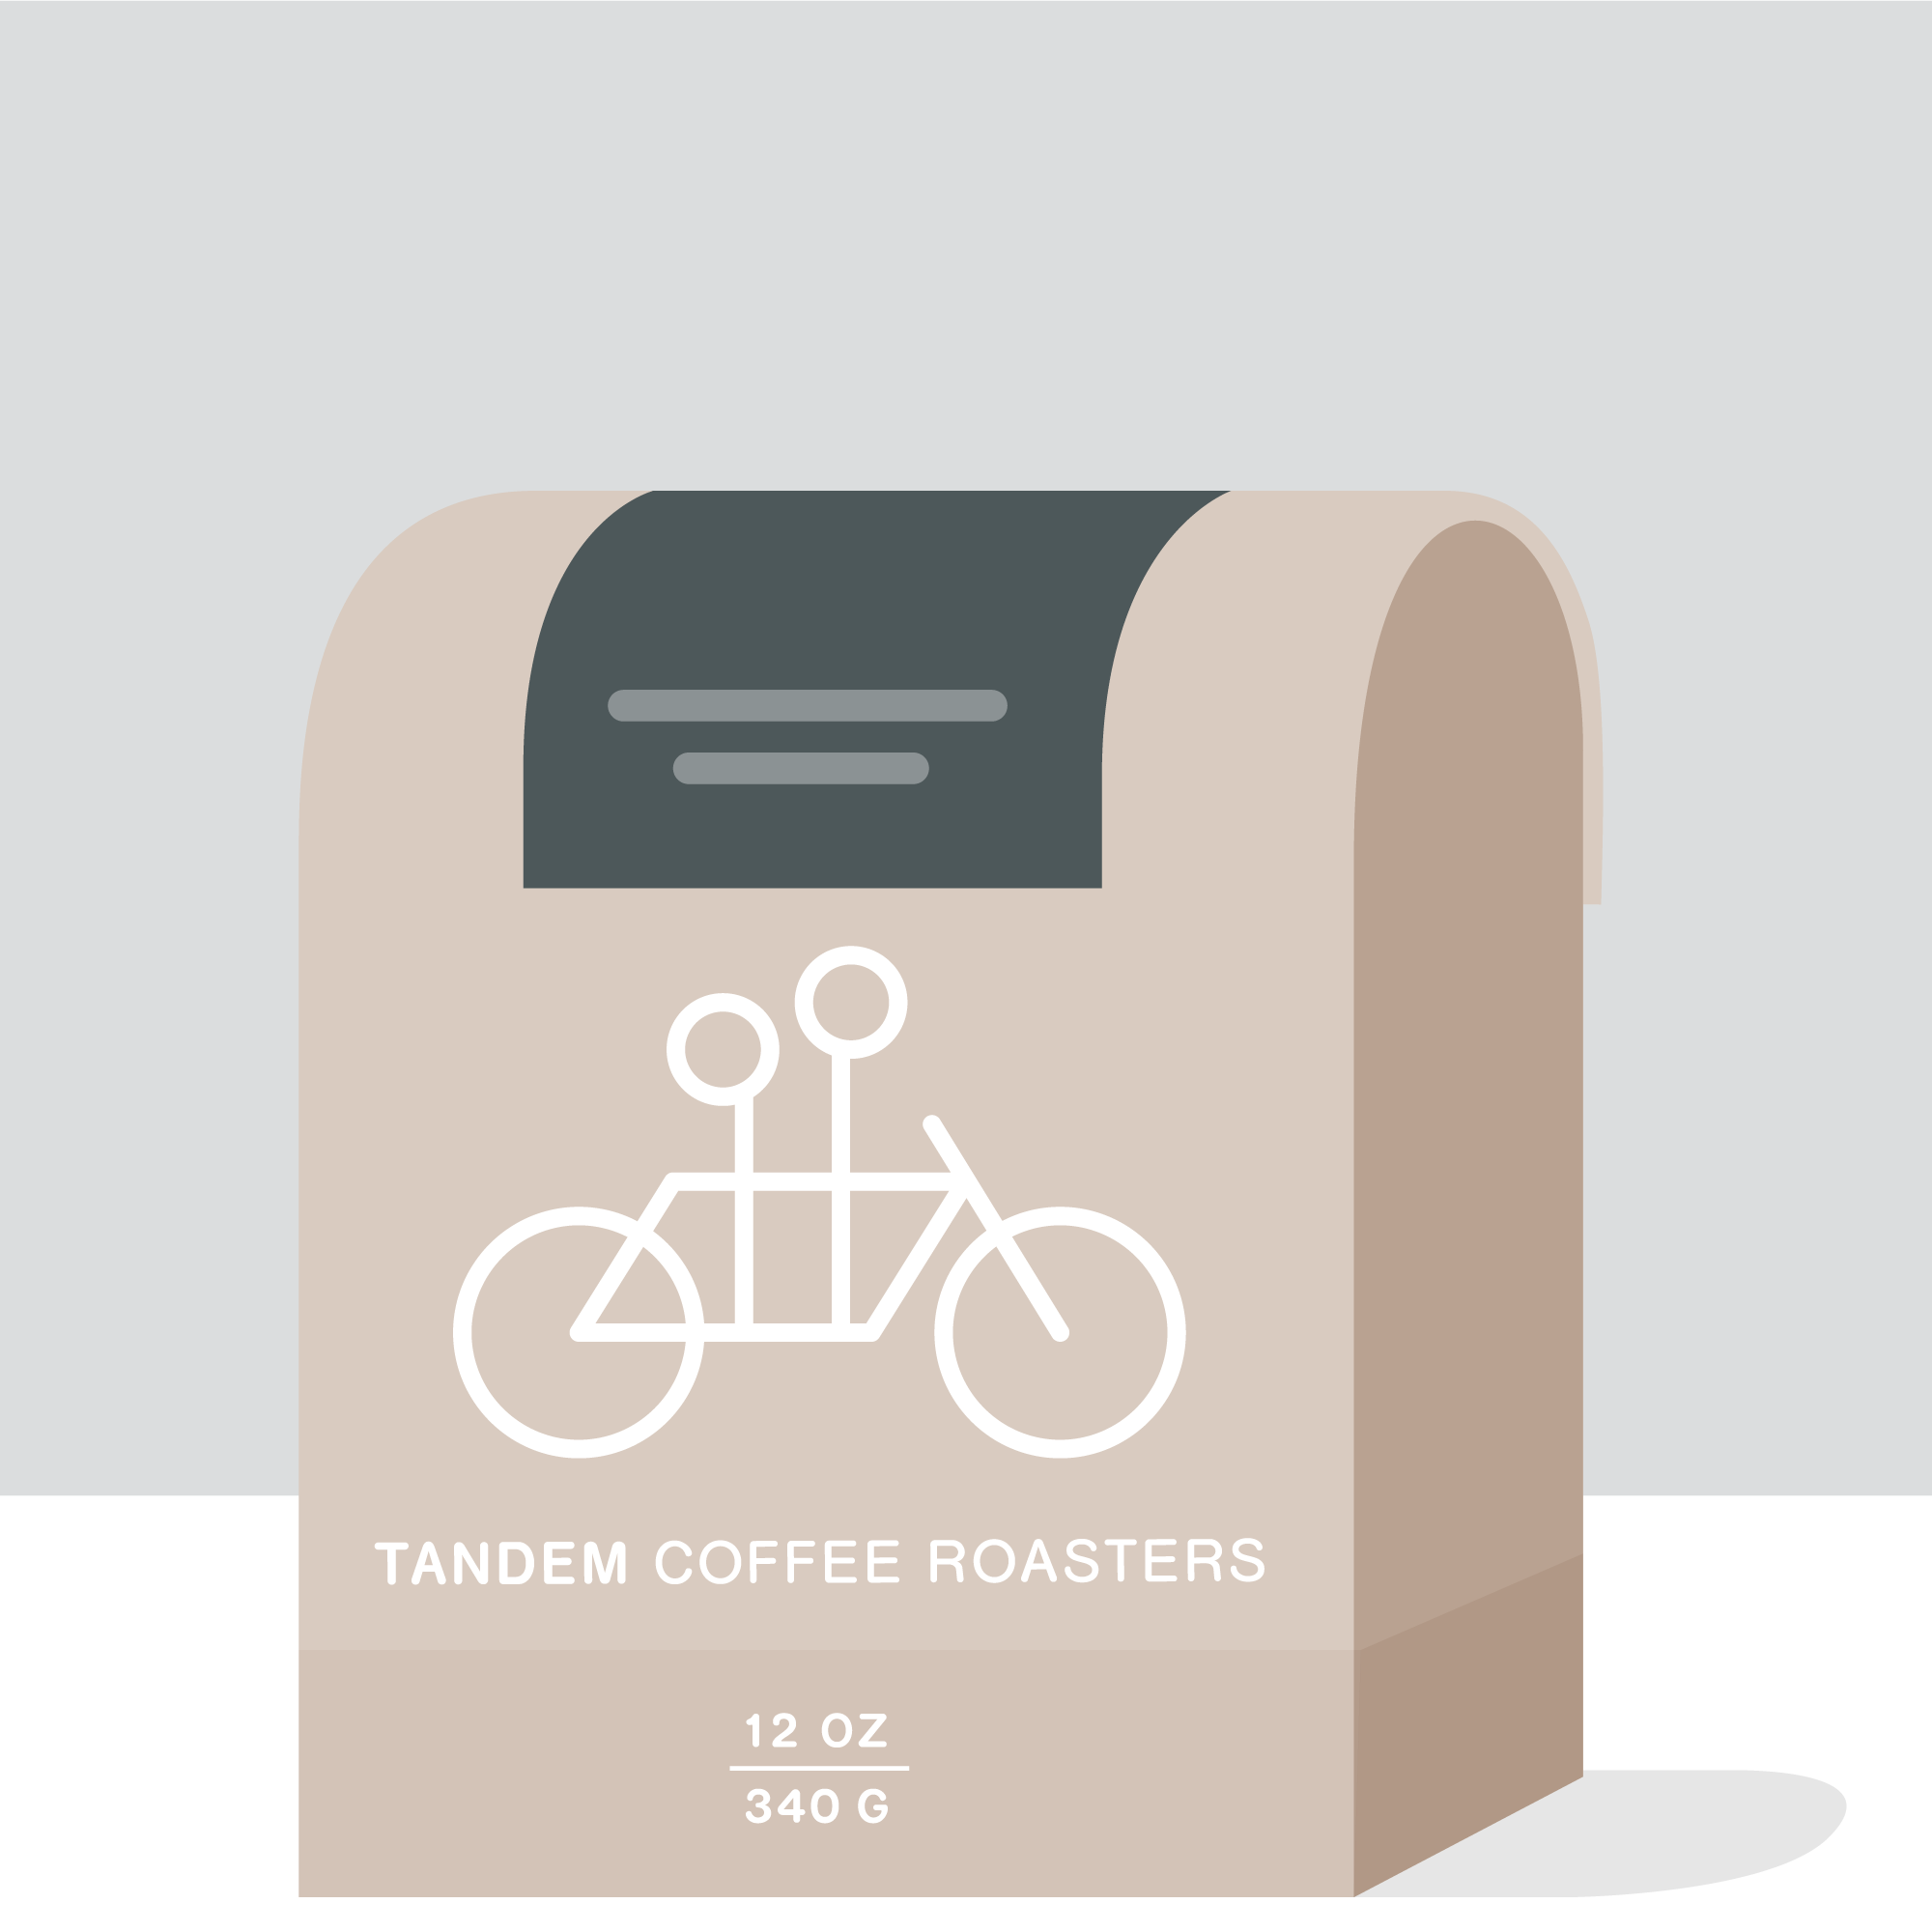 A stylized image of a beige paper bag from Tandem Coffee Roasters featuring Stoker roasted coffee with a bicycle logo, indicating the contents to be 12 oz (340 g) of coffee.